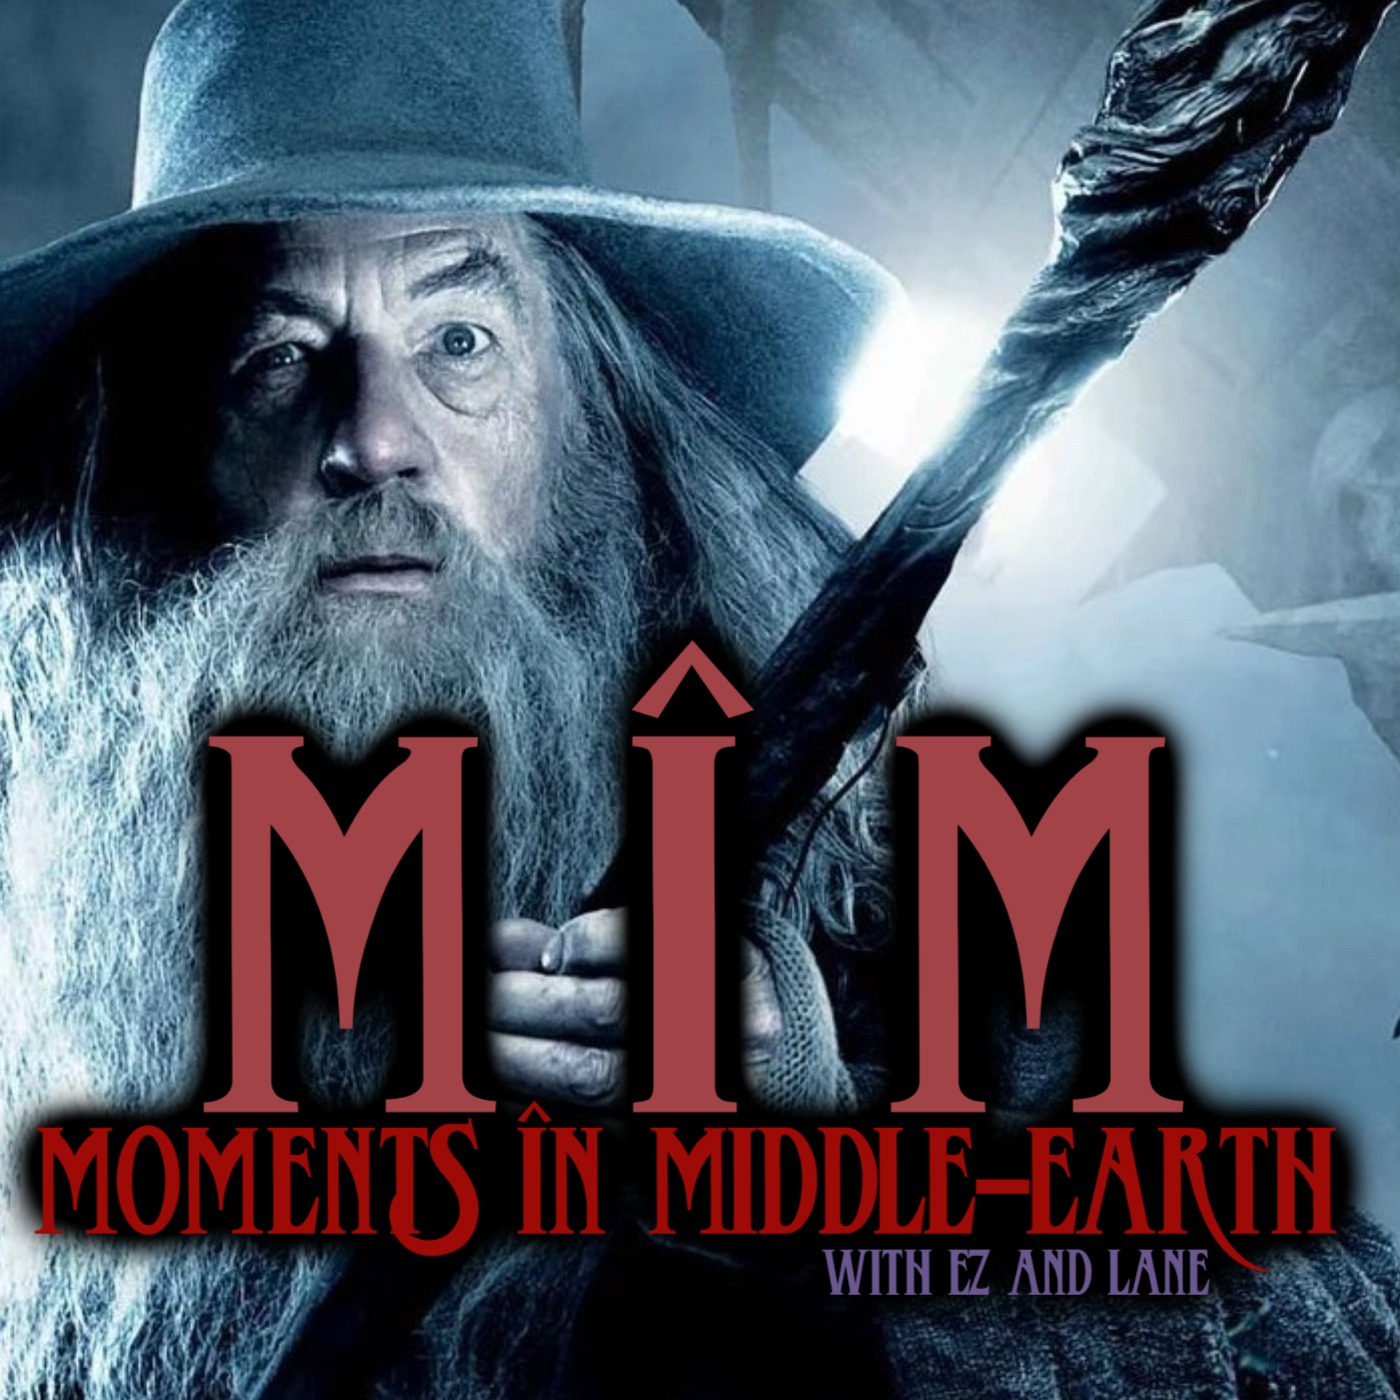 Moments in Middle Earth - Ep 3 - Gandalf's Council